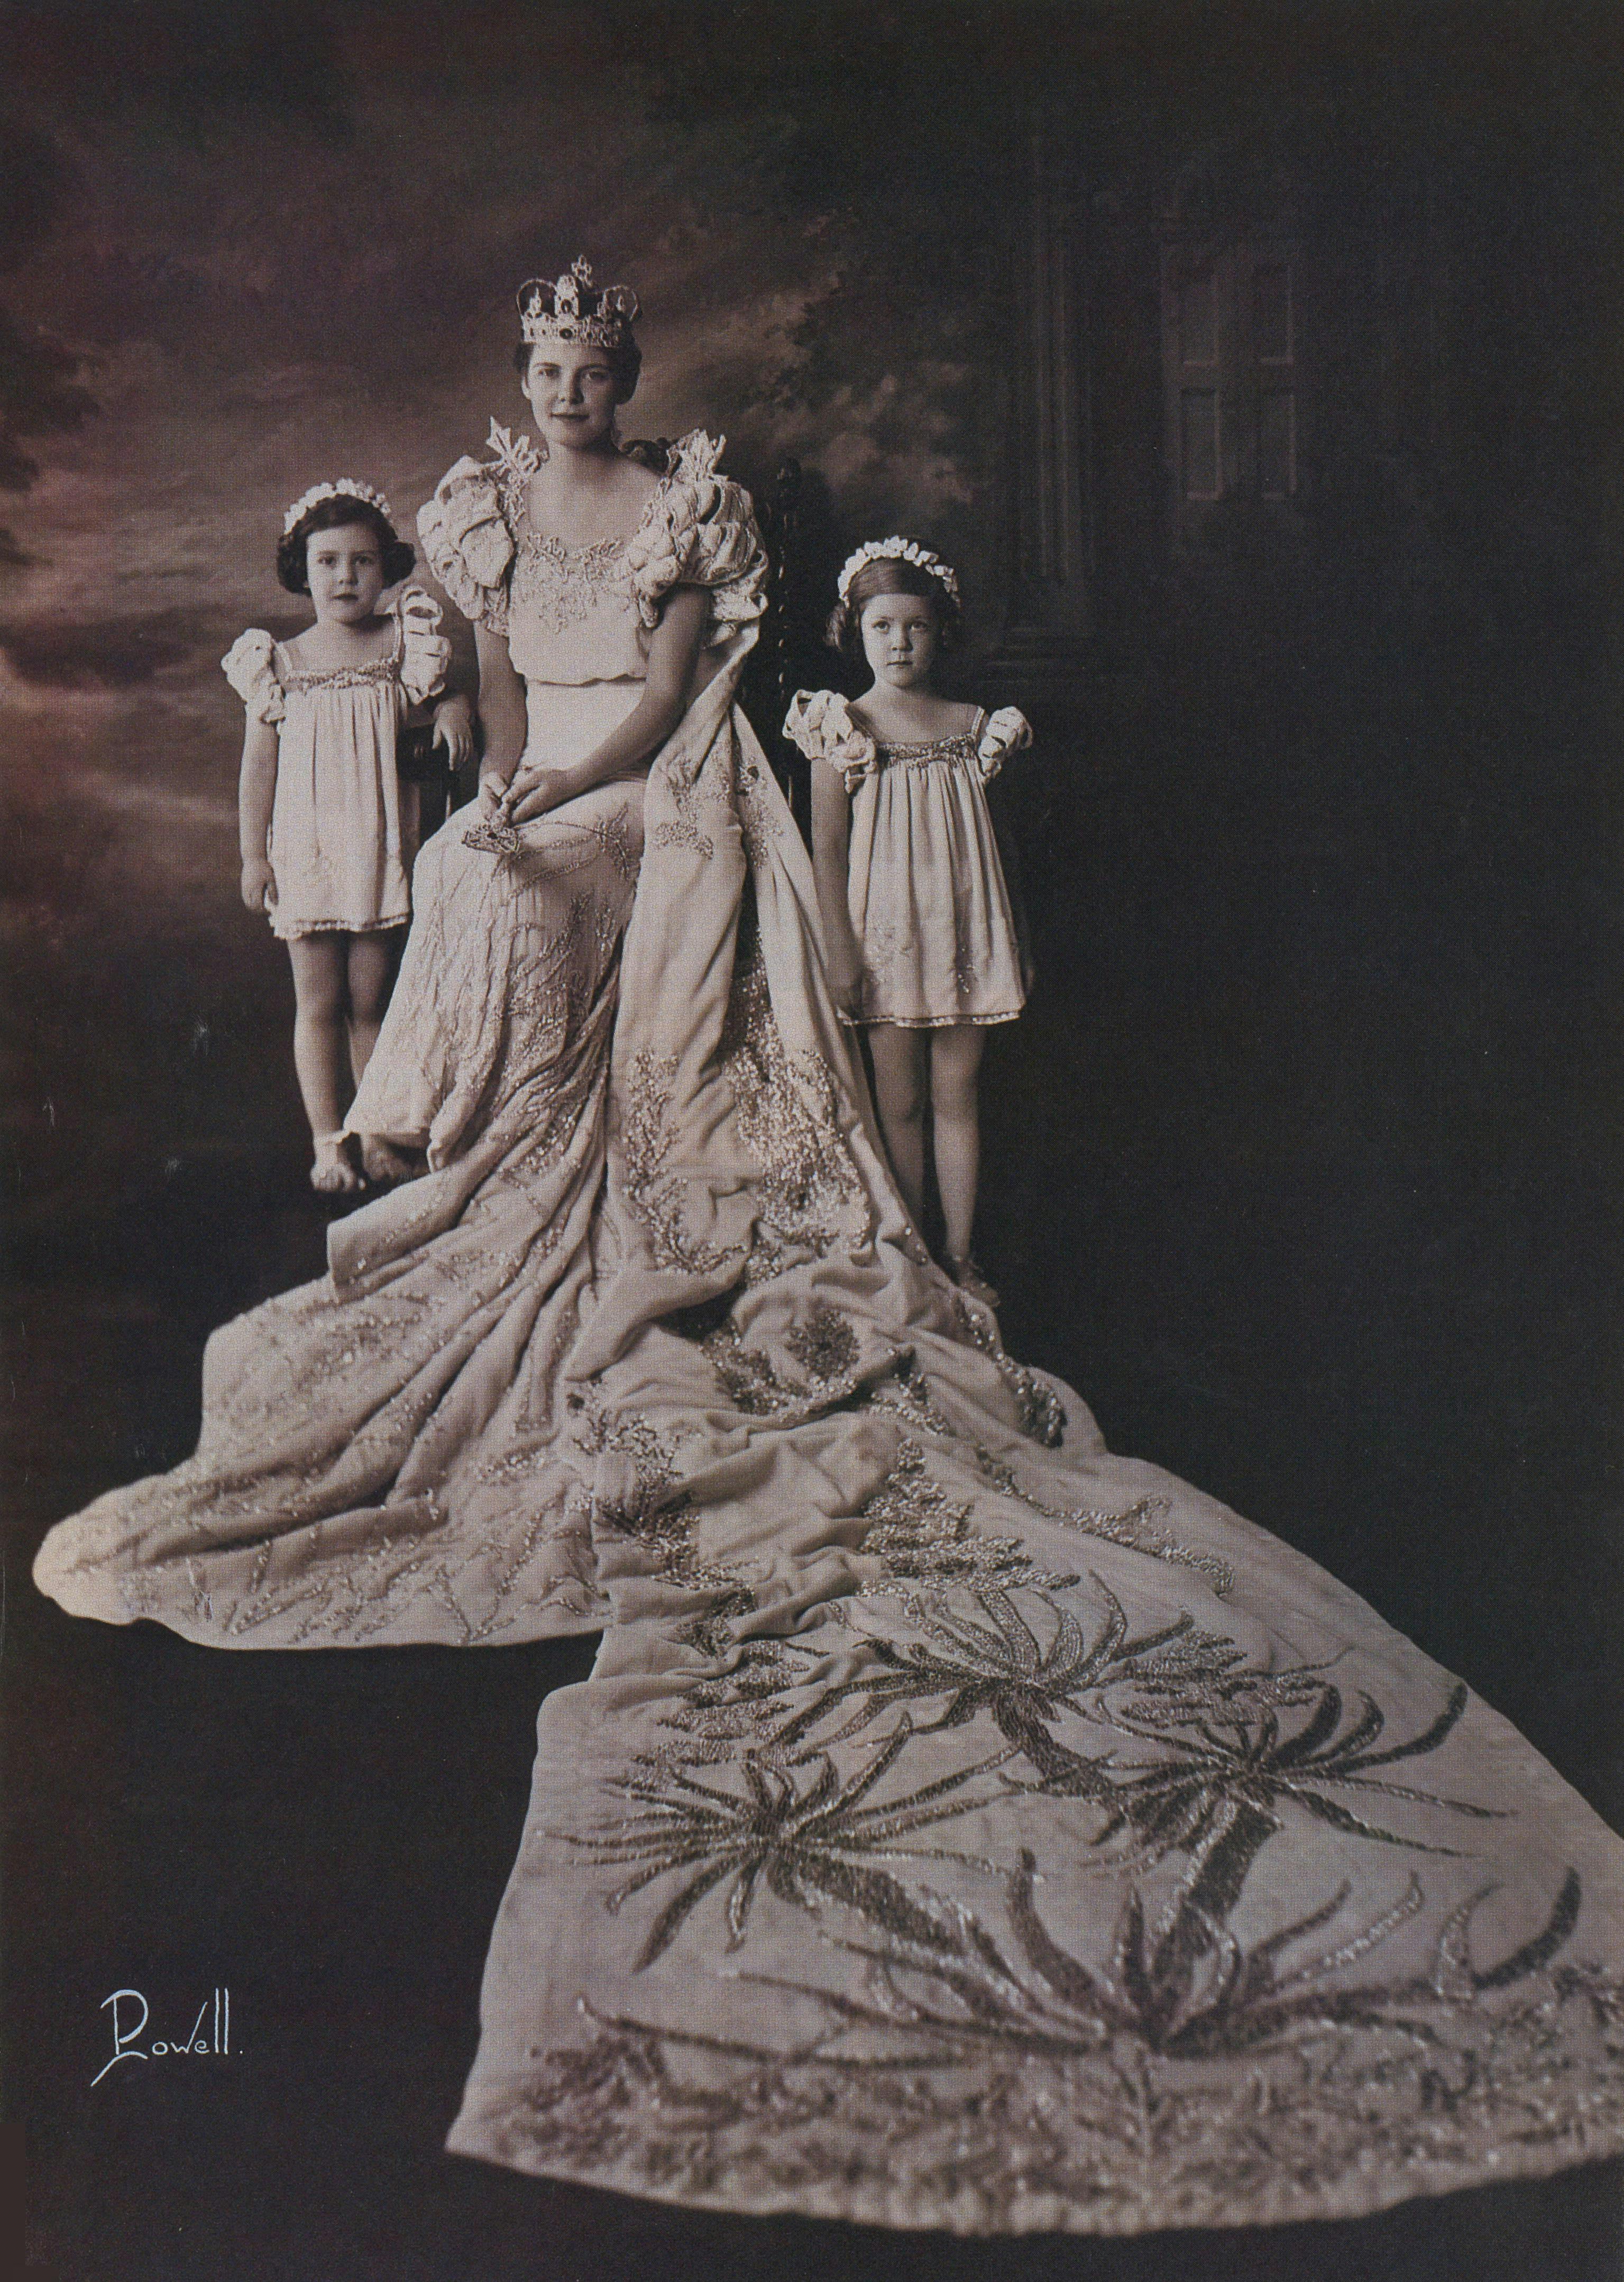 Her Gracious Majesty, Mollie Bond of the House of Hayes, Queen of Texas and the Court of Adventure, with pages to the Queen, Frances Tewes and Agnes Clegg, 1936